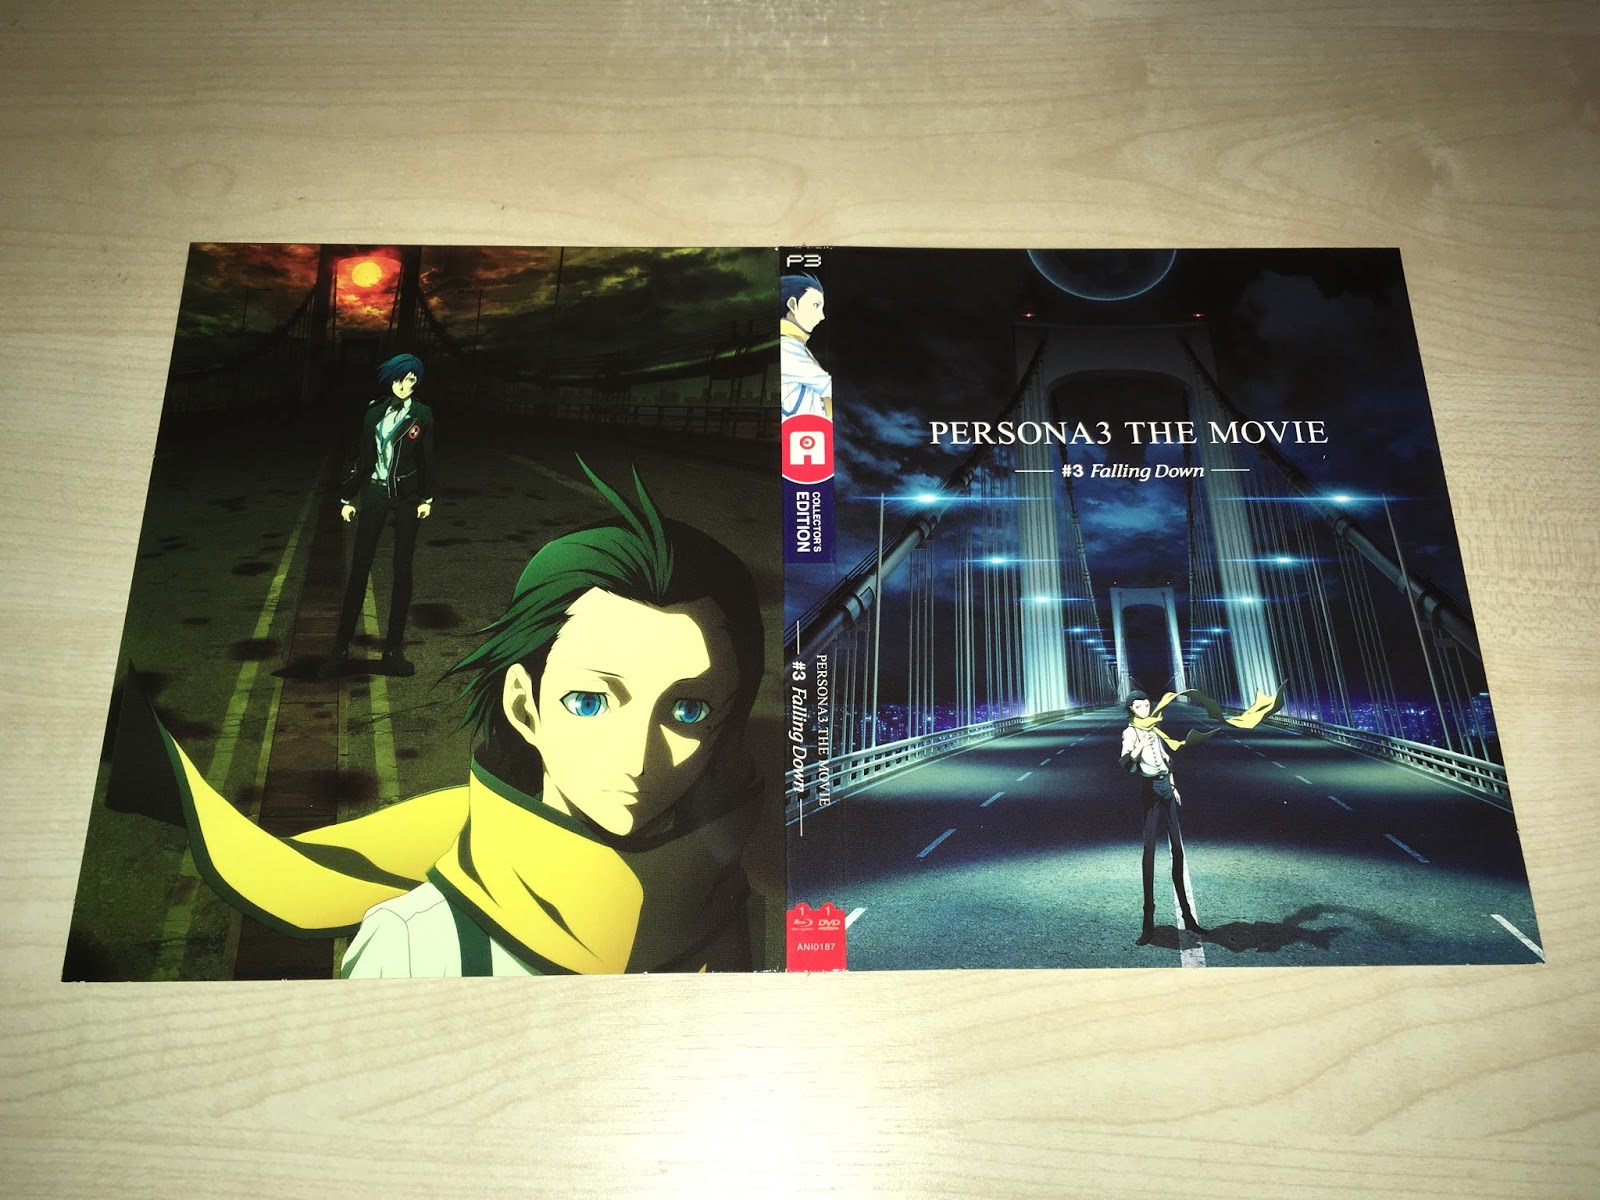 Unboxing Uk Persona 3 The Movie 3 Falling Down Collector S Edition Dvd Portal Bj